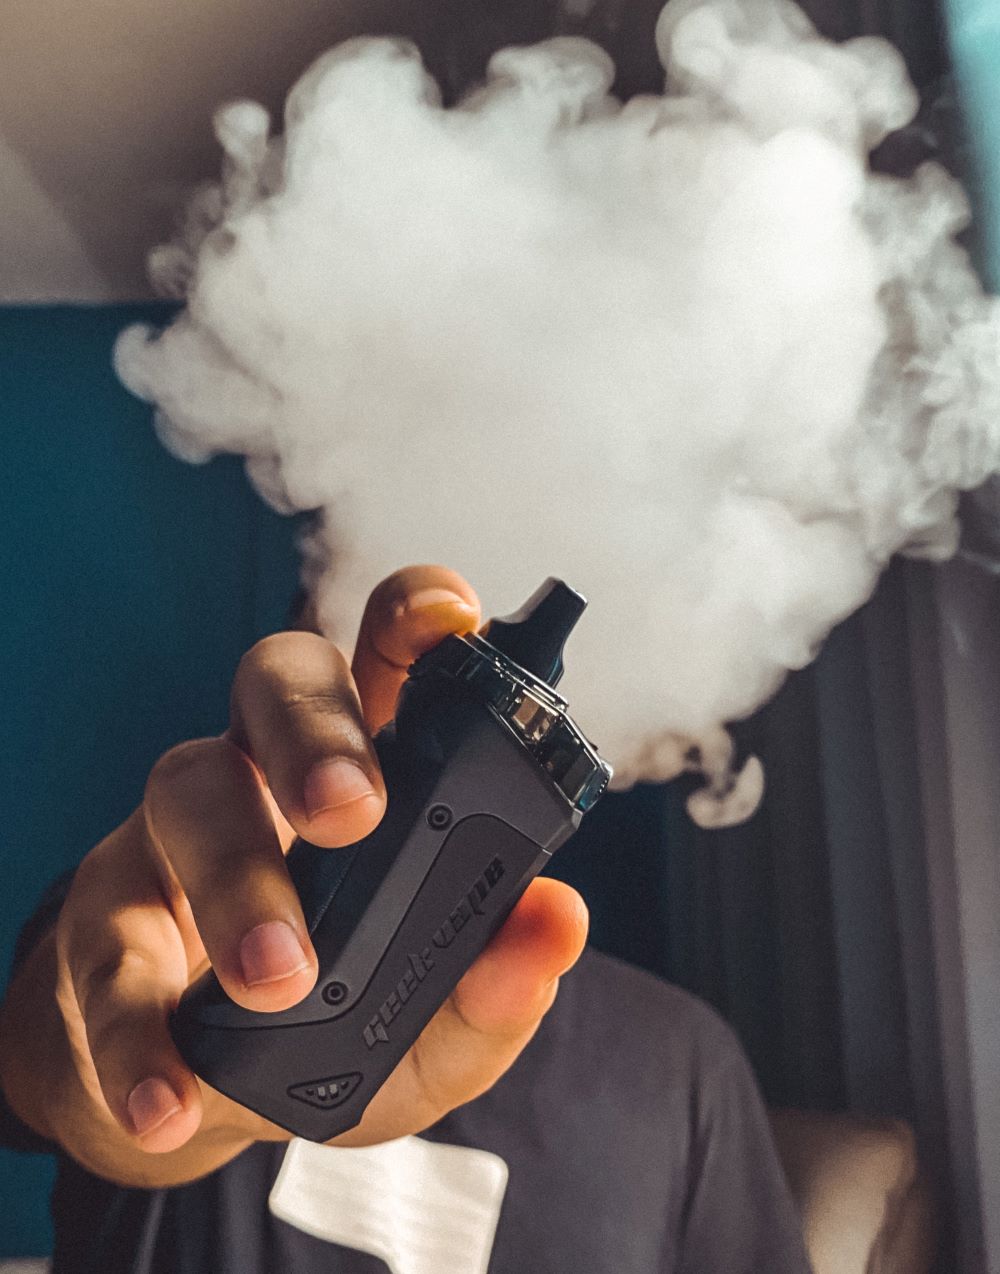 Teens, Young Adults are Using Illegal Disposable Vape Pens